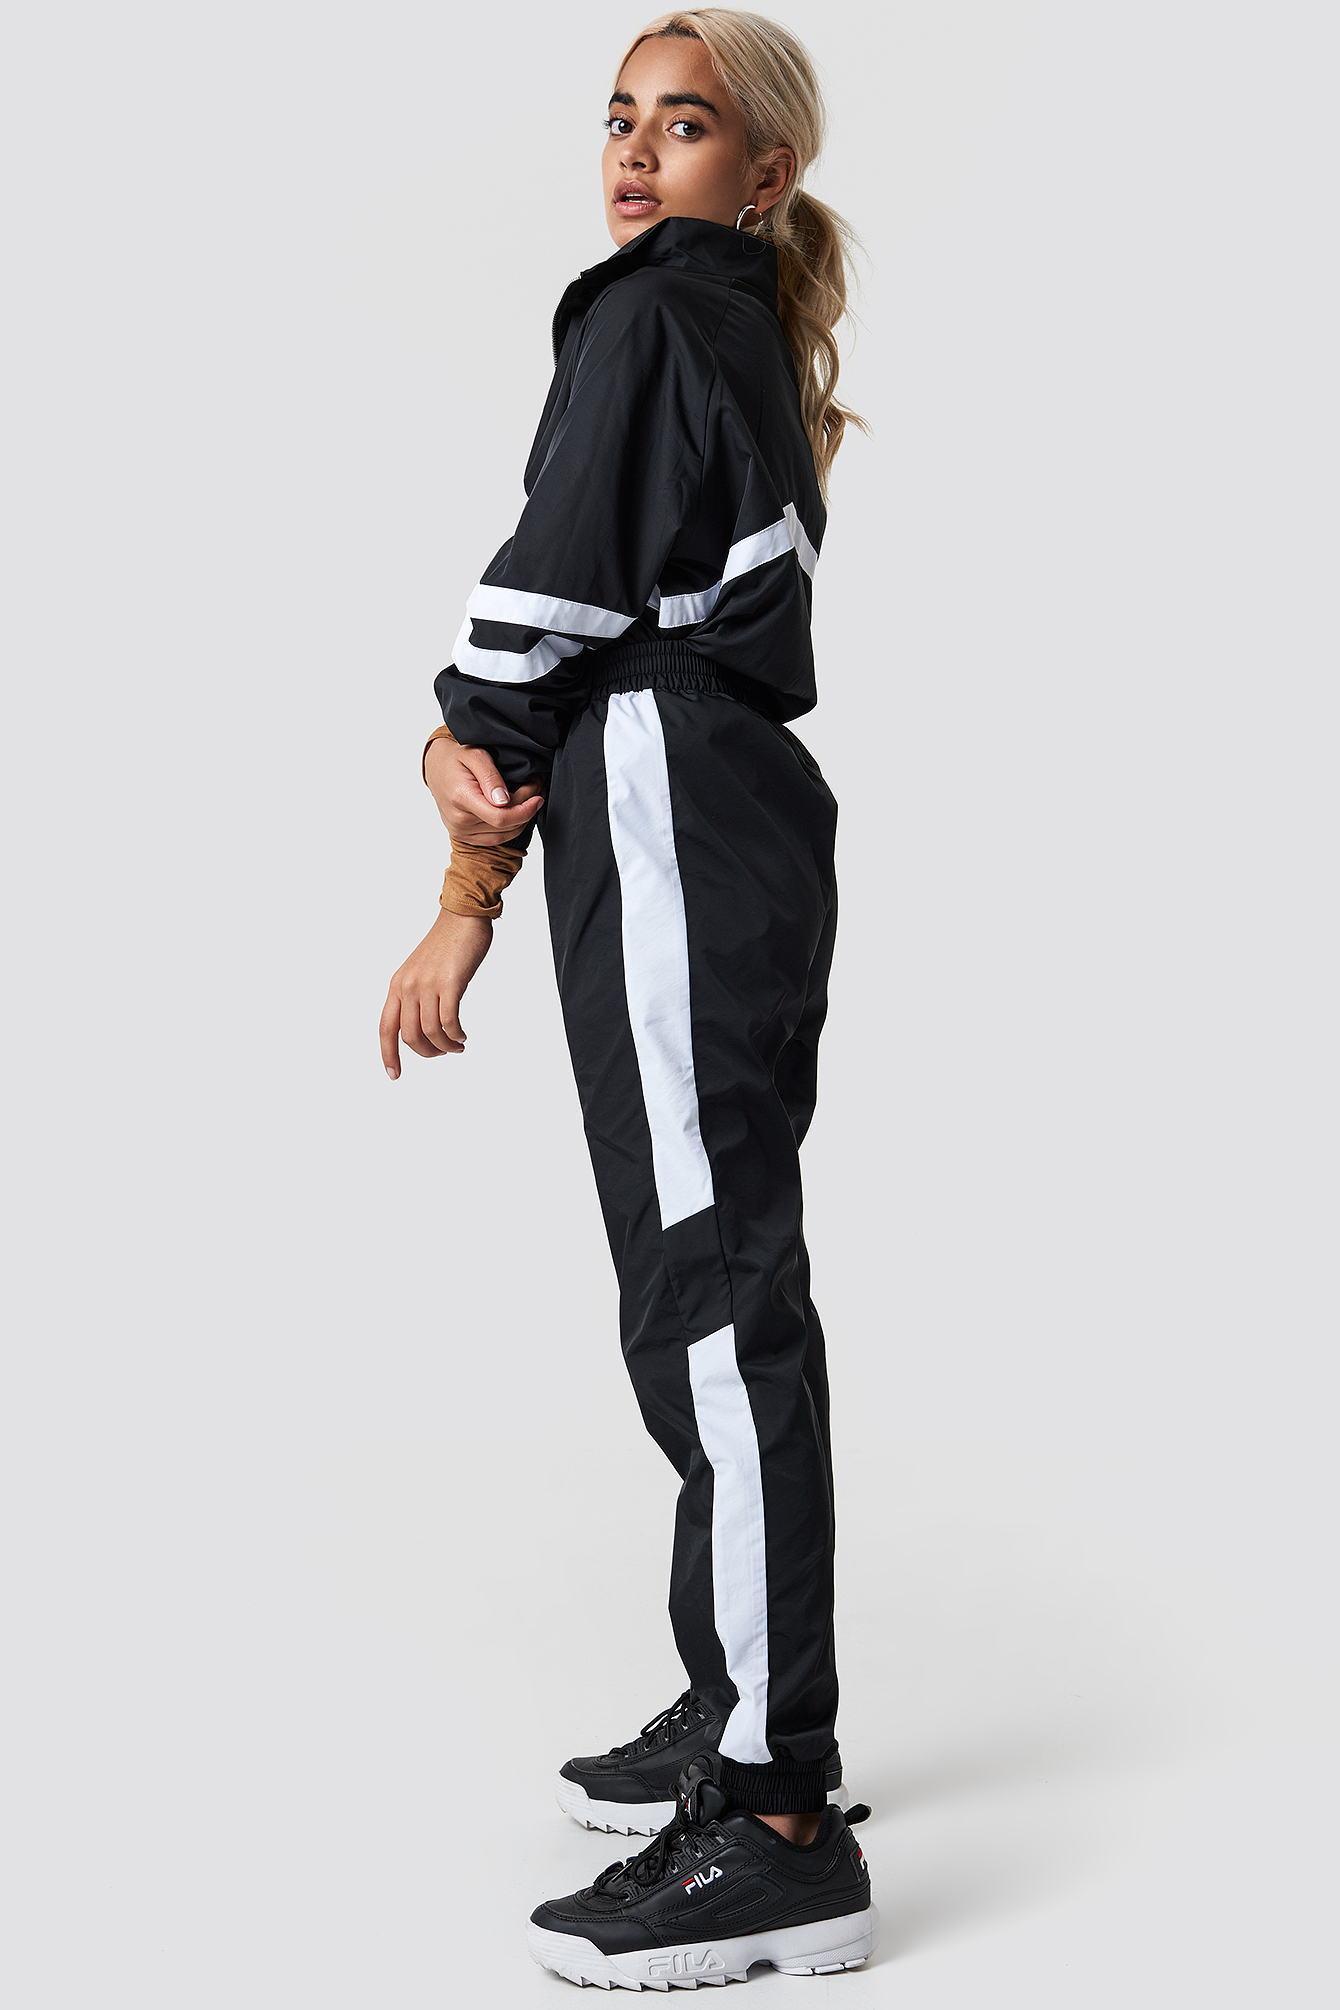 tracksuit with side stripes